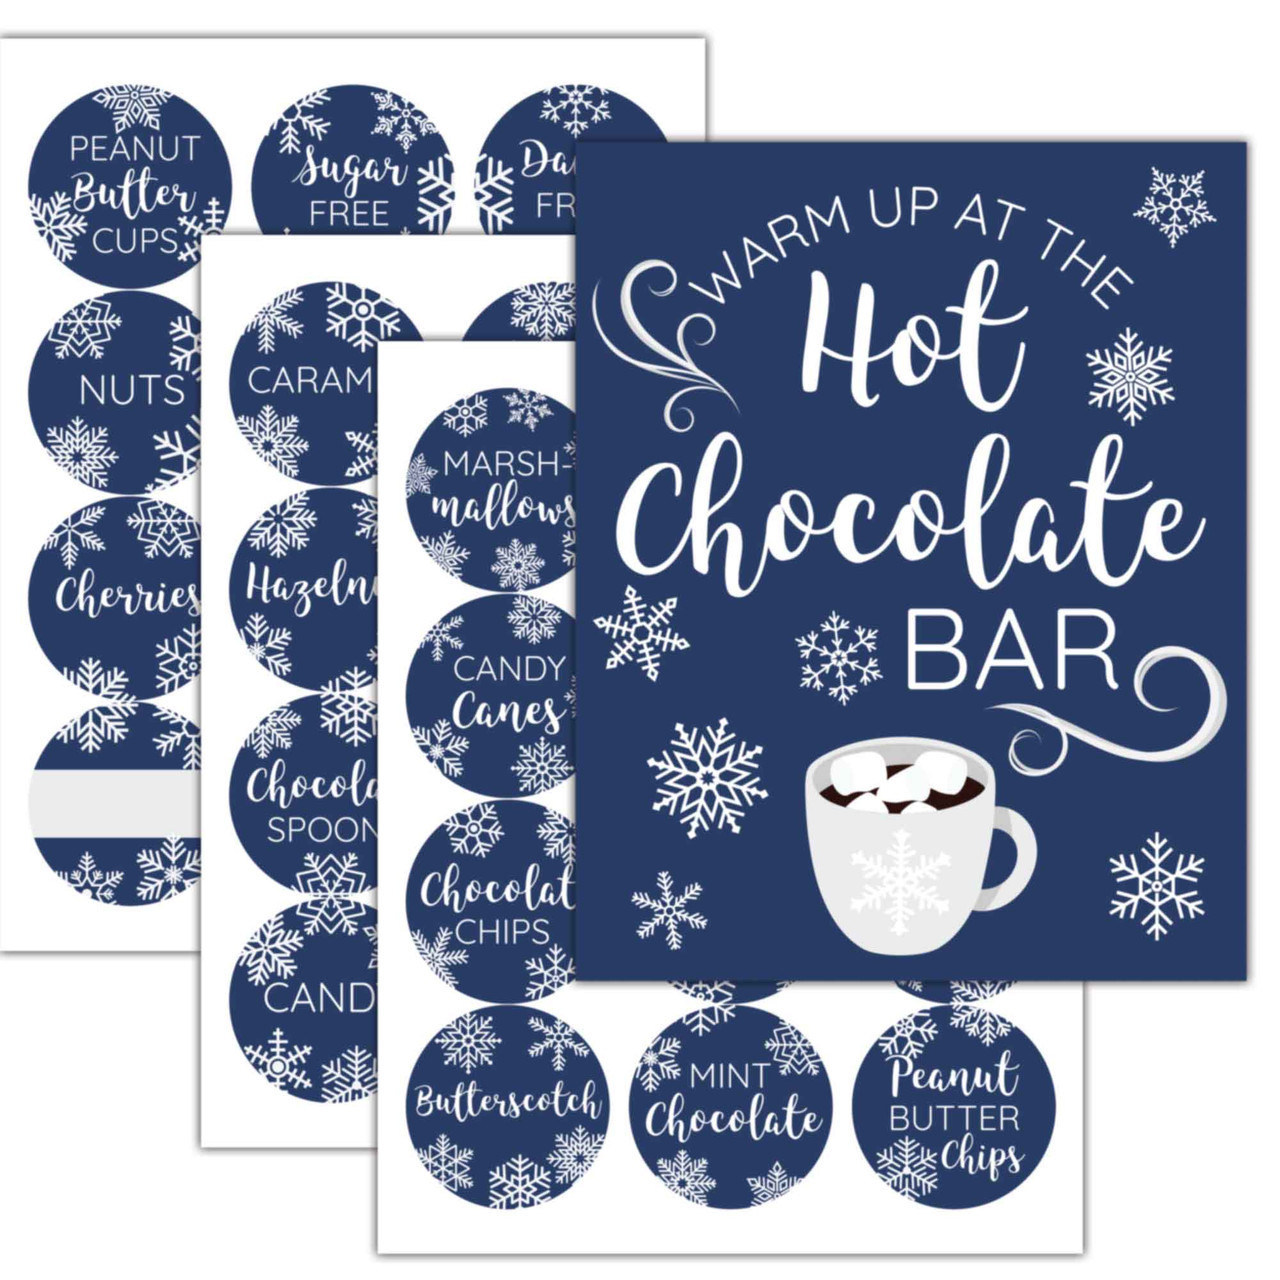 Hot chocolate bar kit 2.5 inch labels + 8x10 paper sign for Wedding party  or baby shower cocoa station